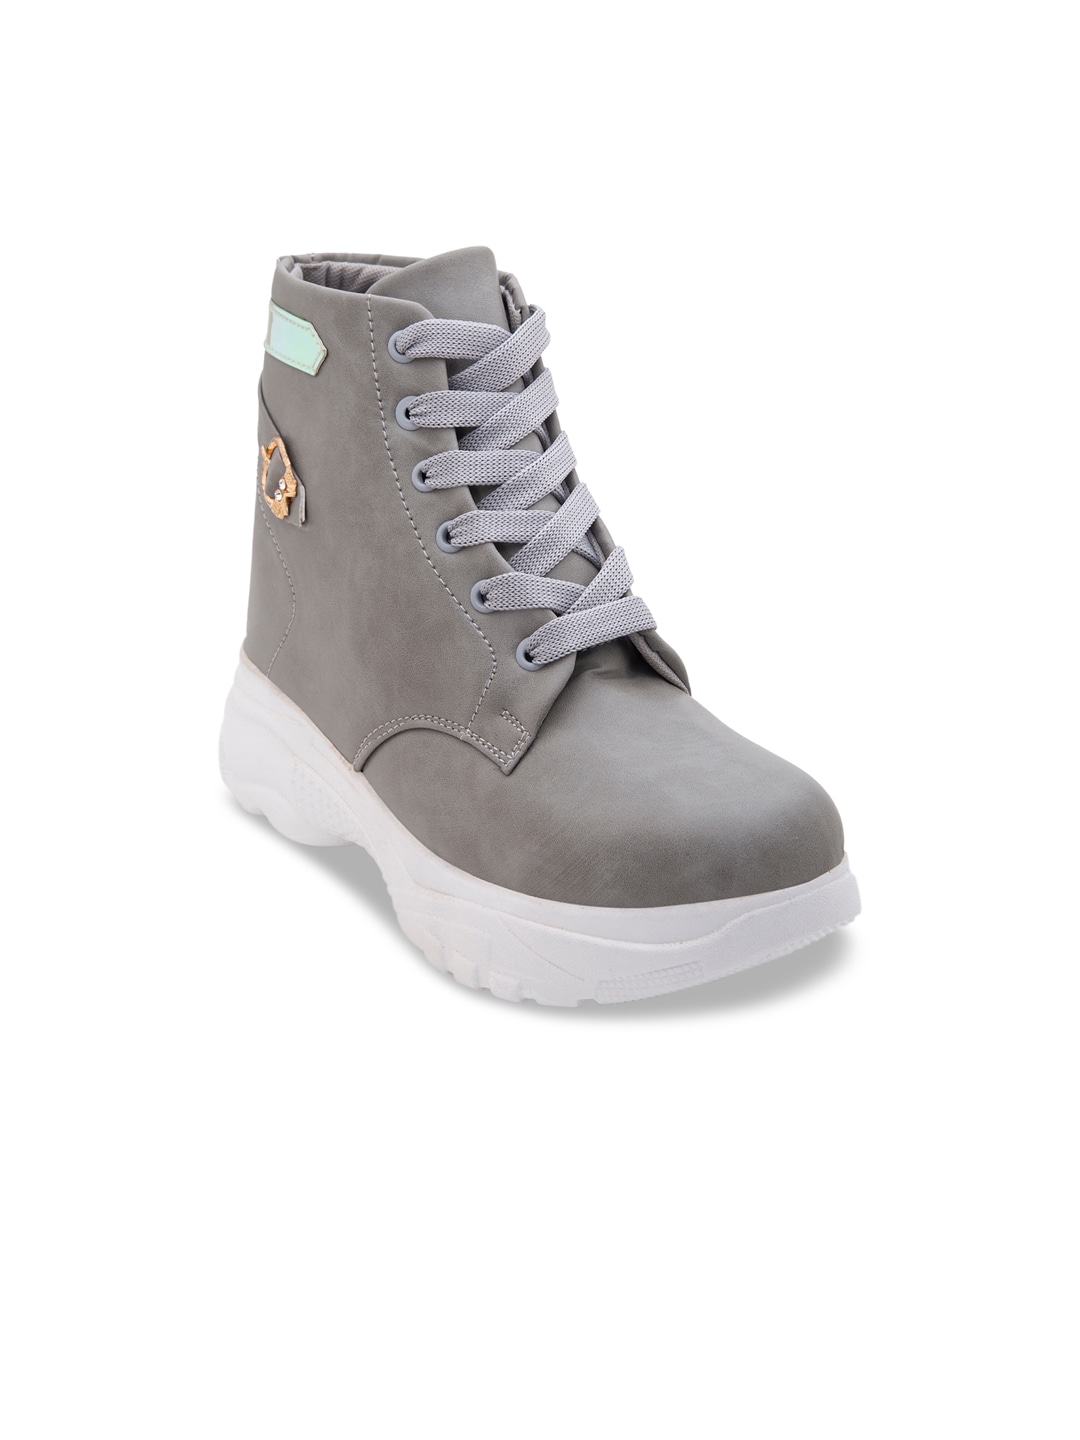 DEAS Grey Wedge Heeled Boots Price in India